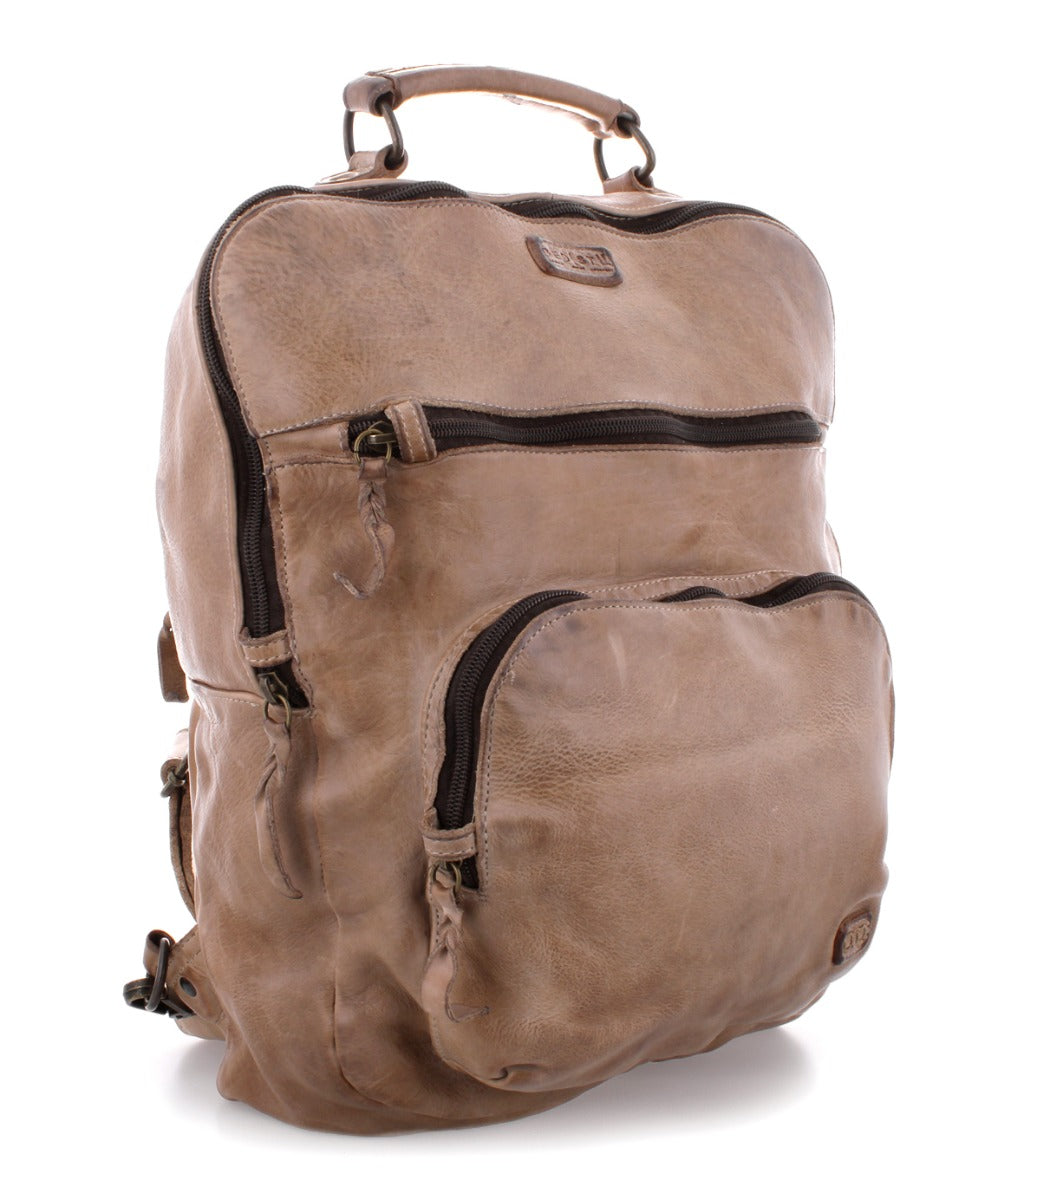 A beige leather Bed Stu Lafe backpack with zippers on the side.